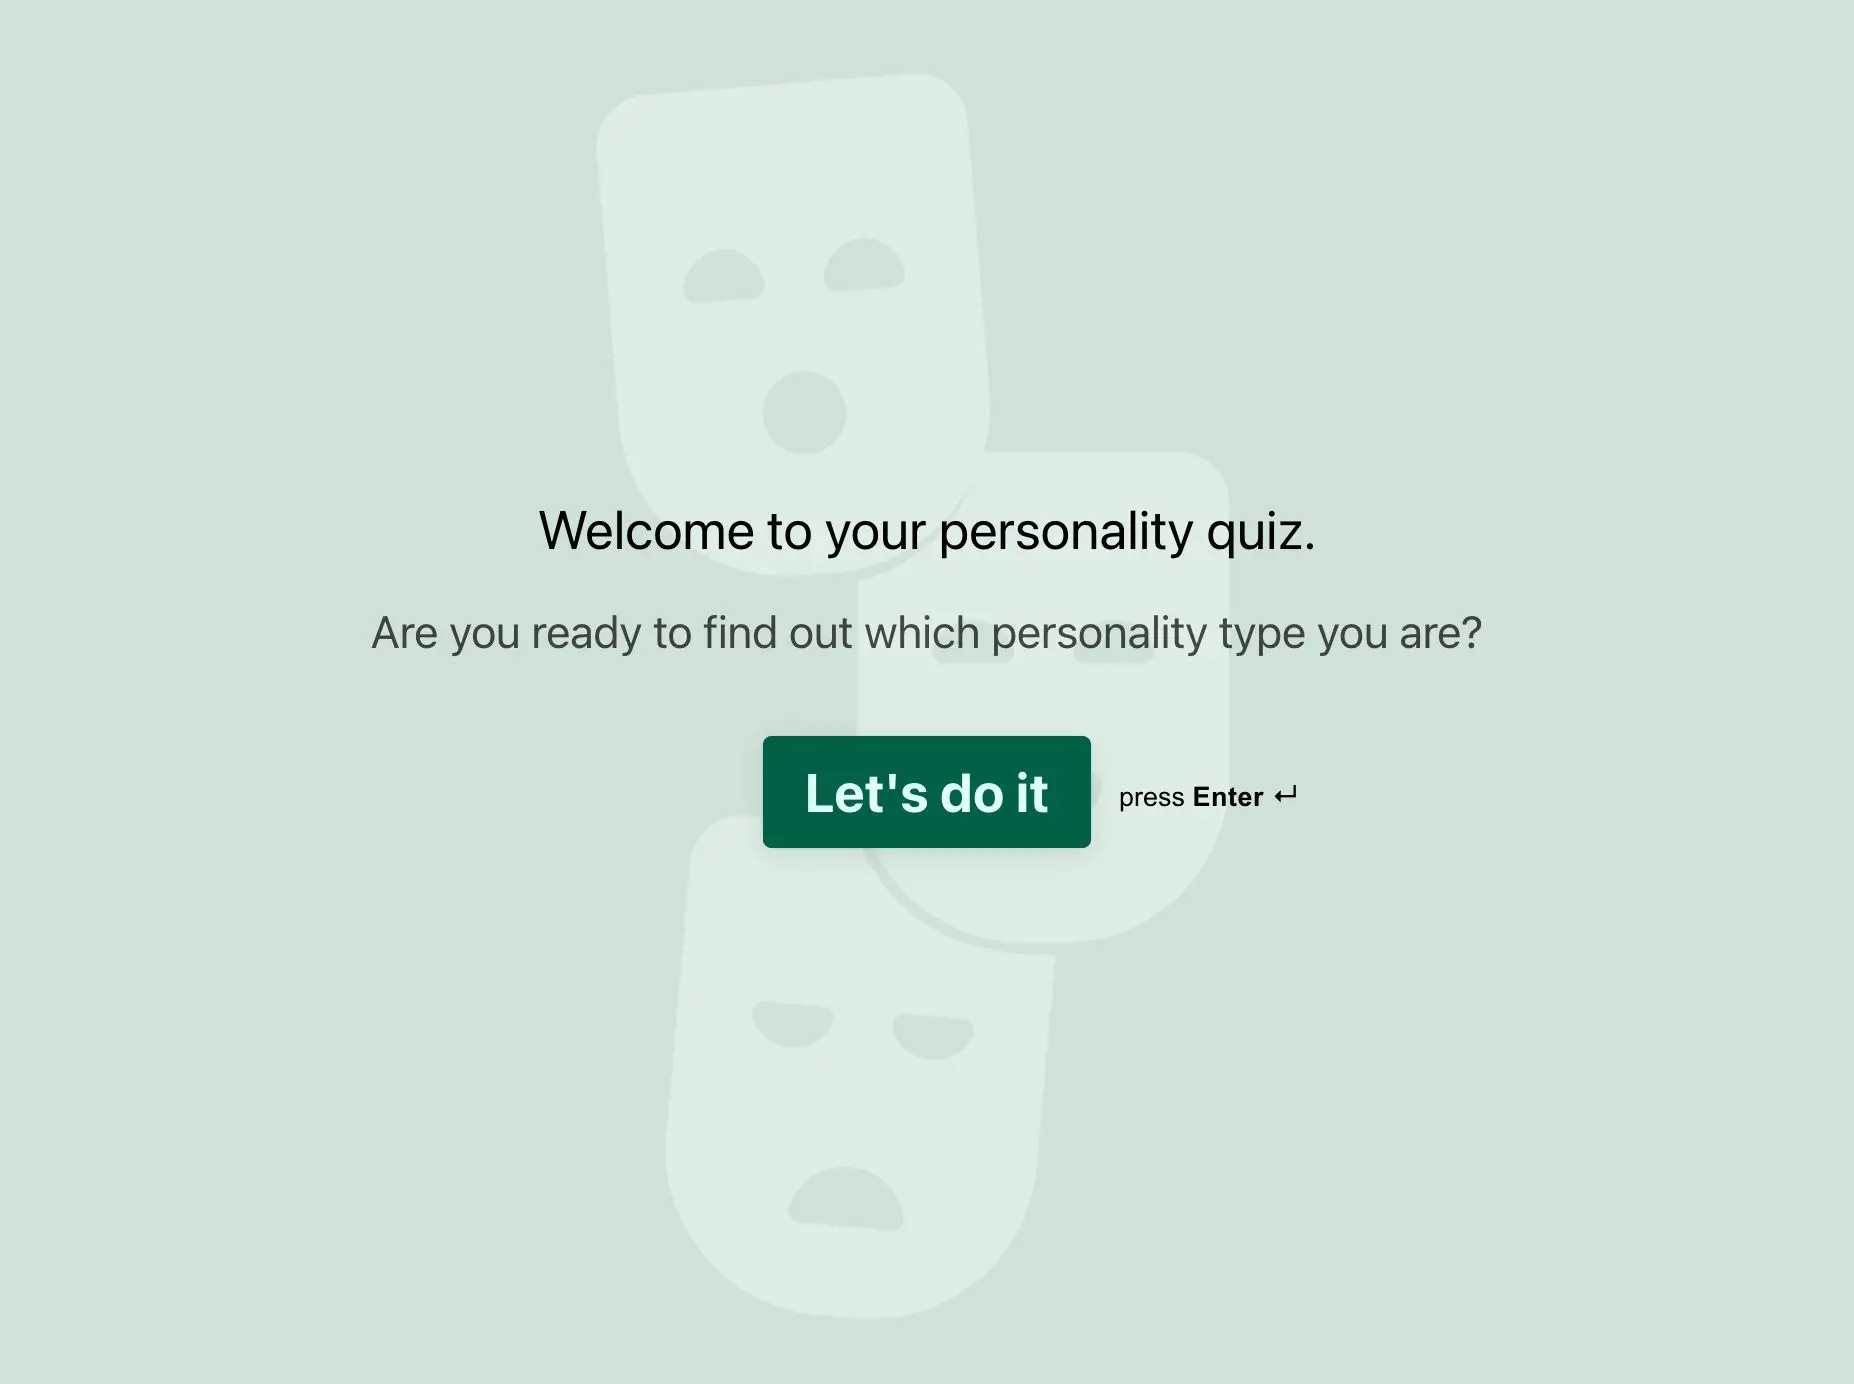 Test Your Personality Love Tester Machine